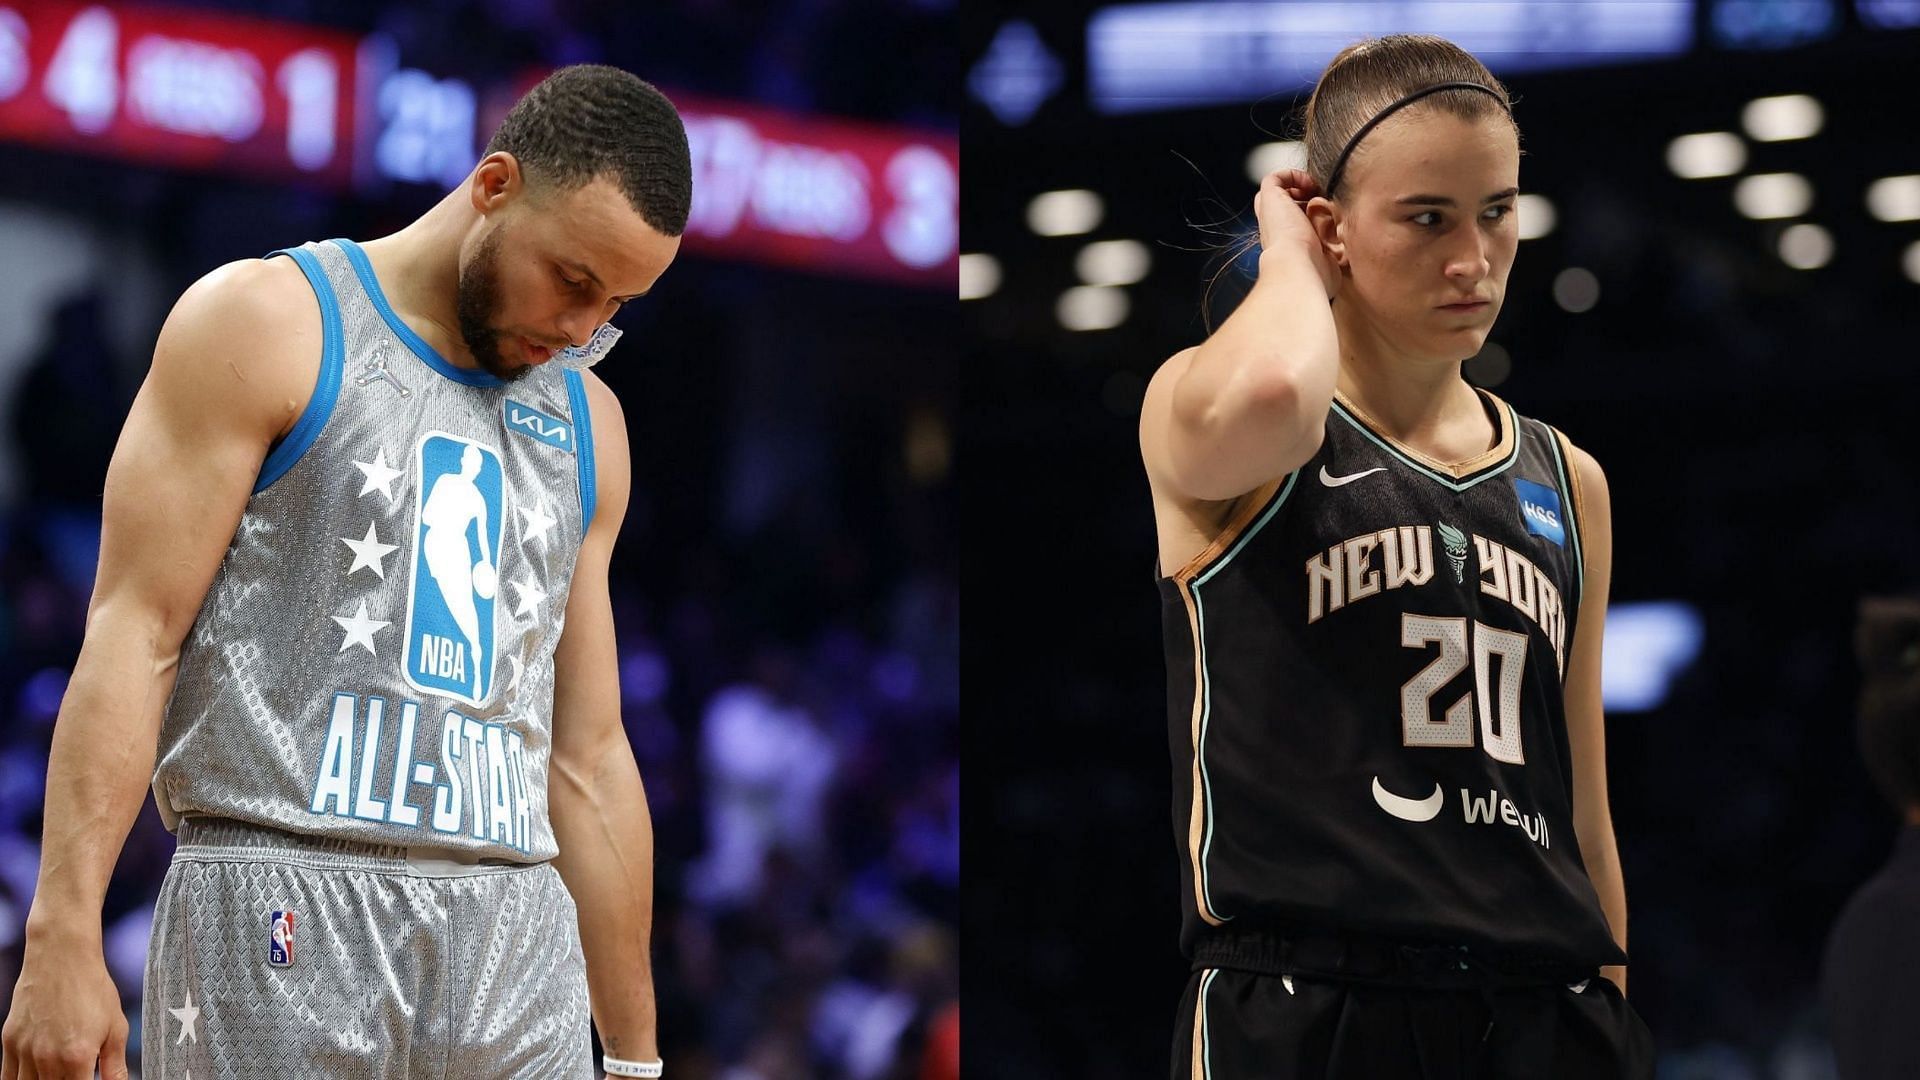 Fans react to Steph Curry facing Sabrina Ionescu in a three-point contest at the NBA All-Star Weekend